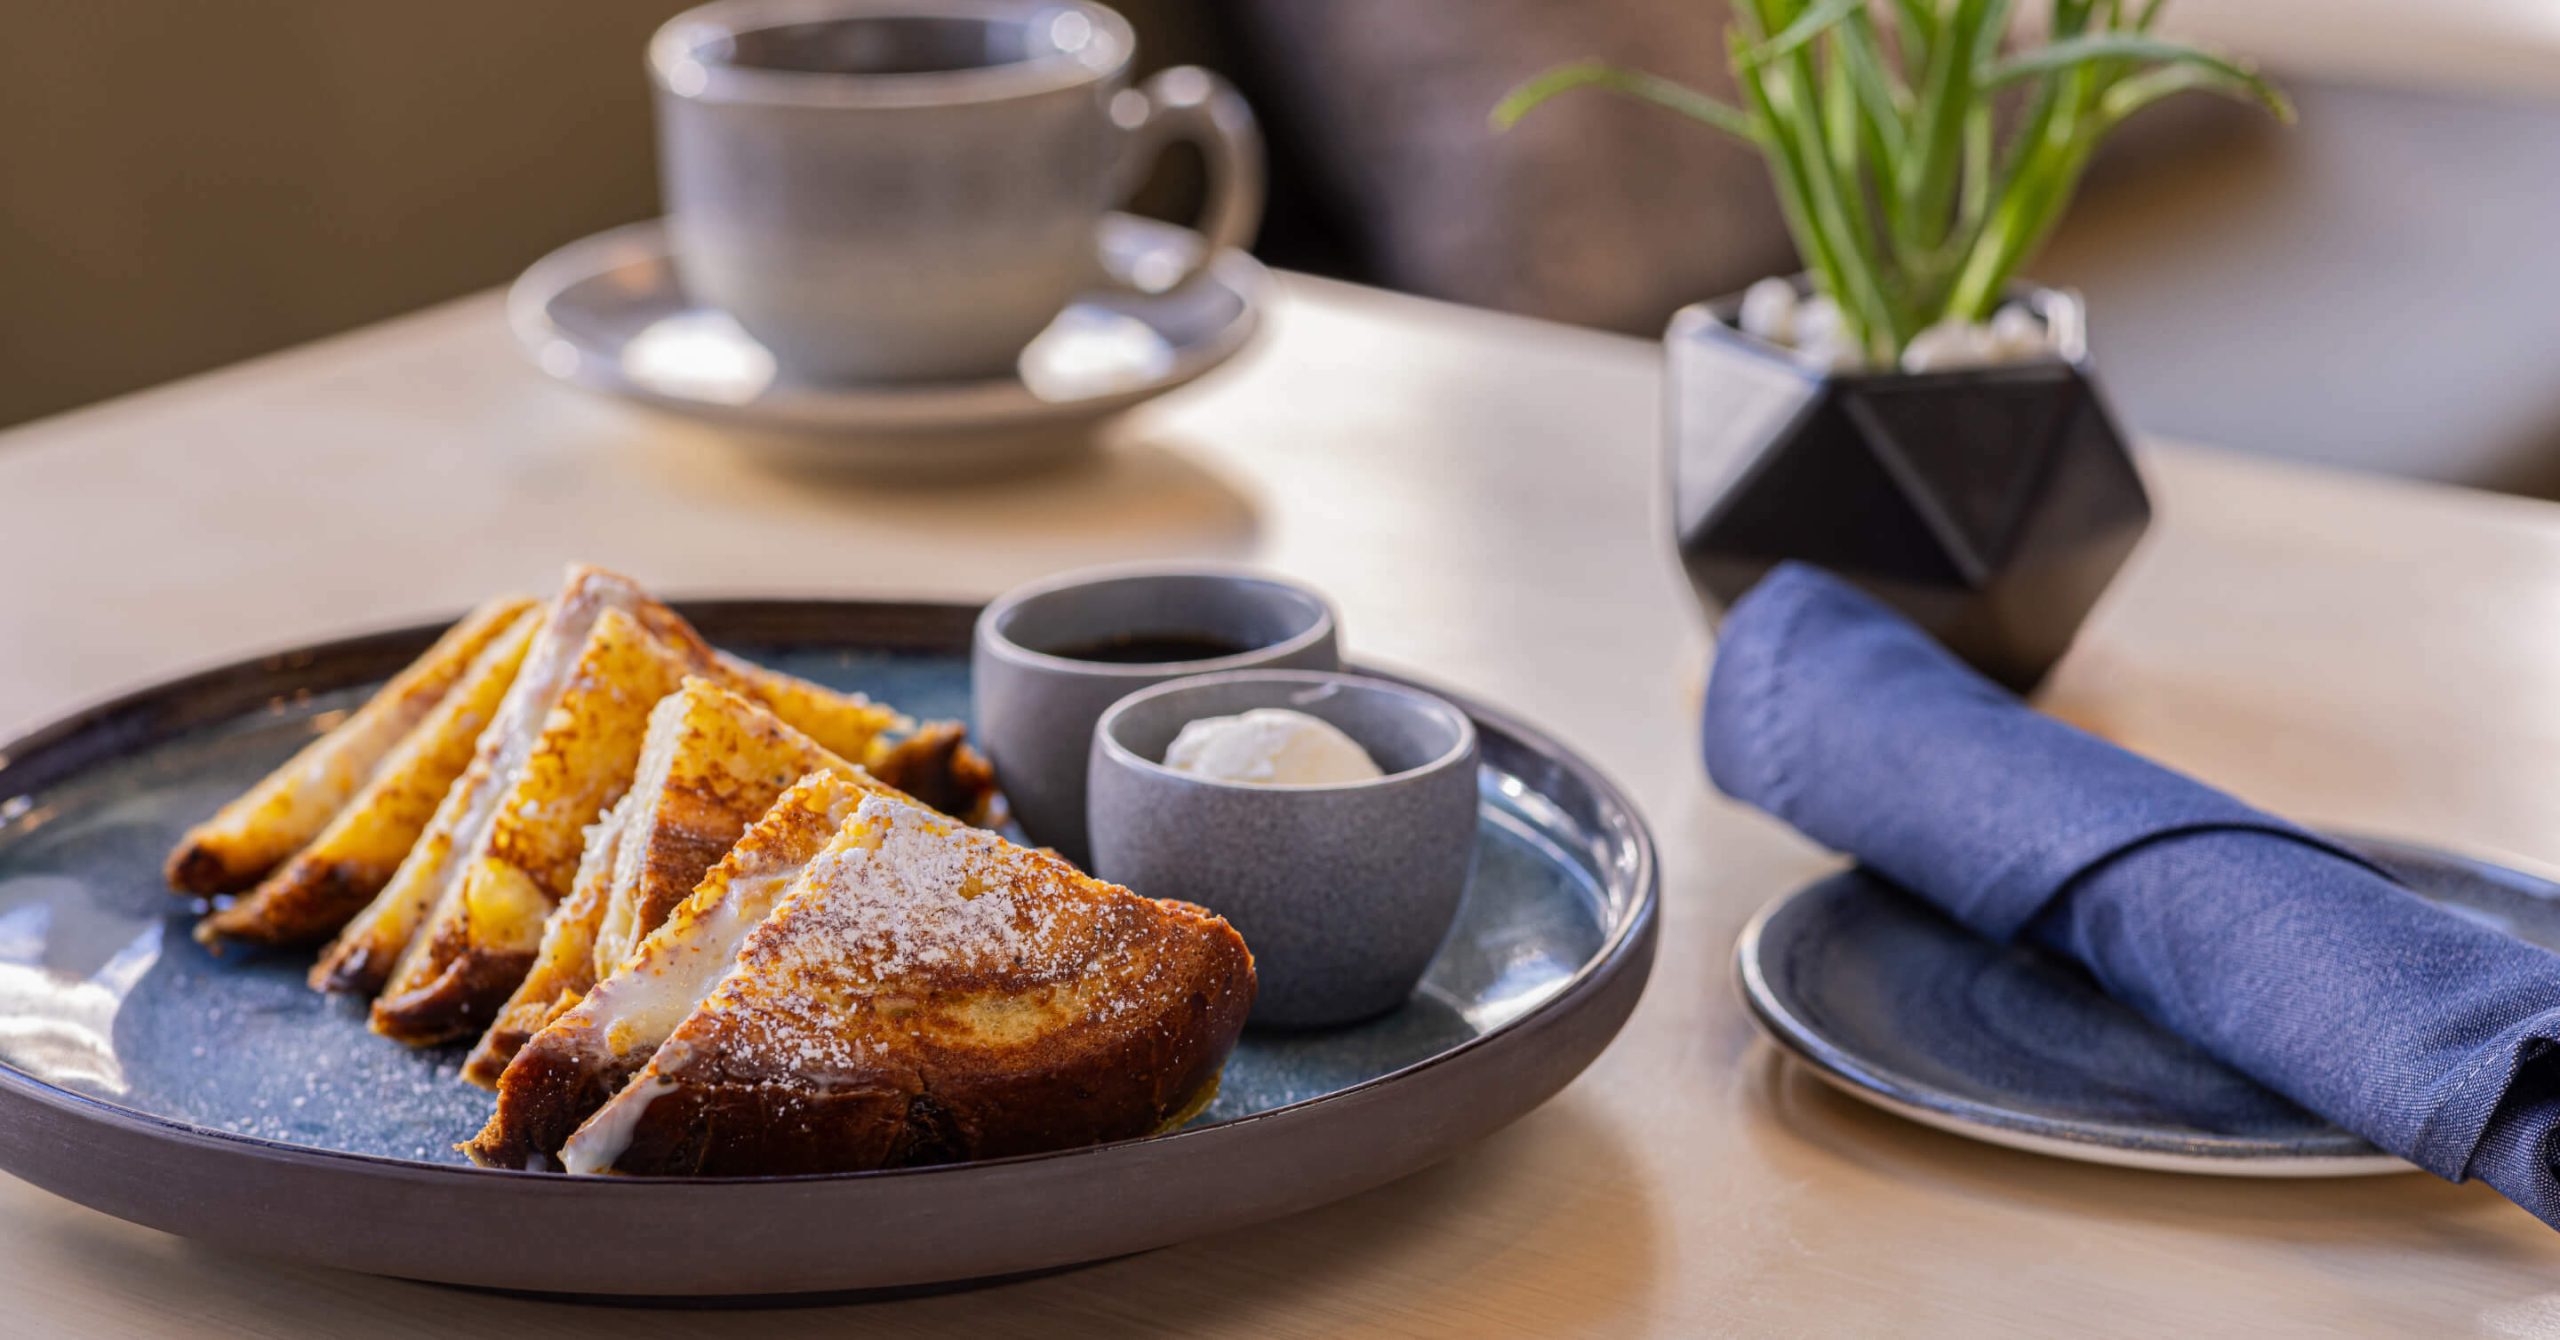 stuffed french toast with a hot cofffee